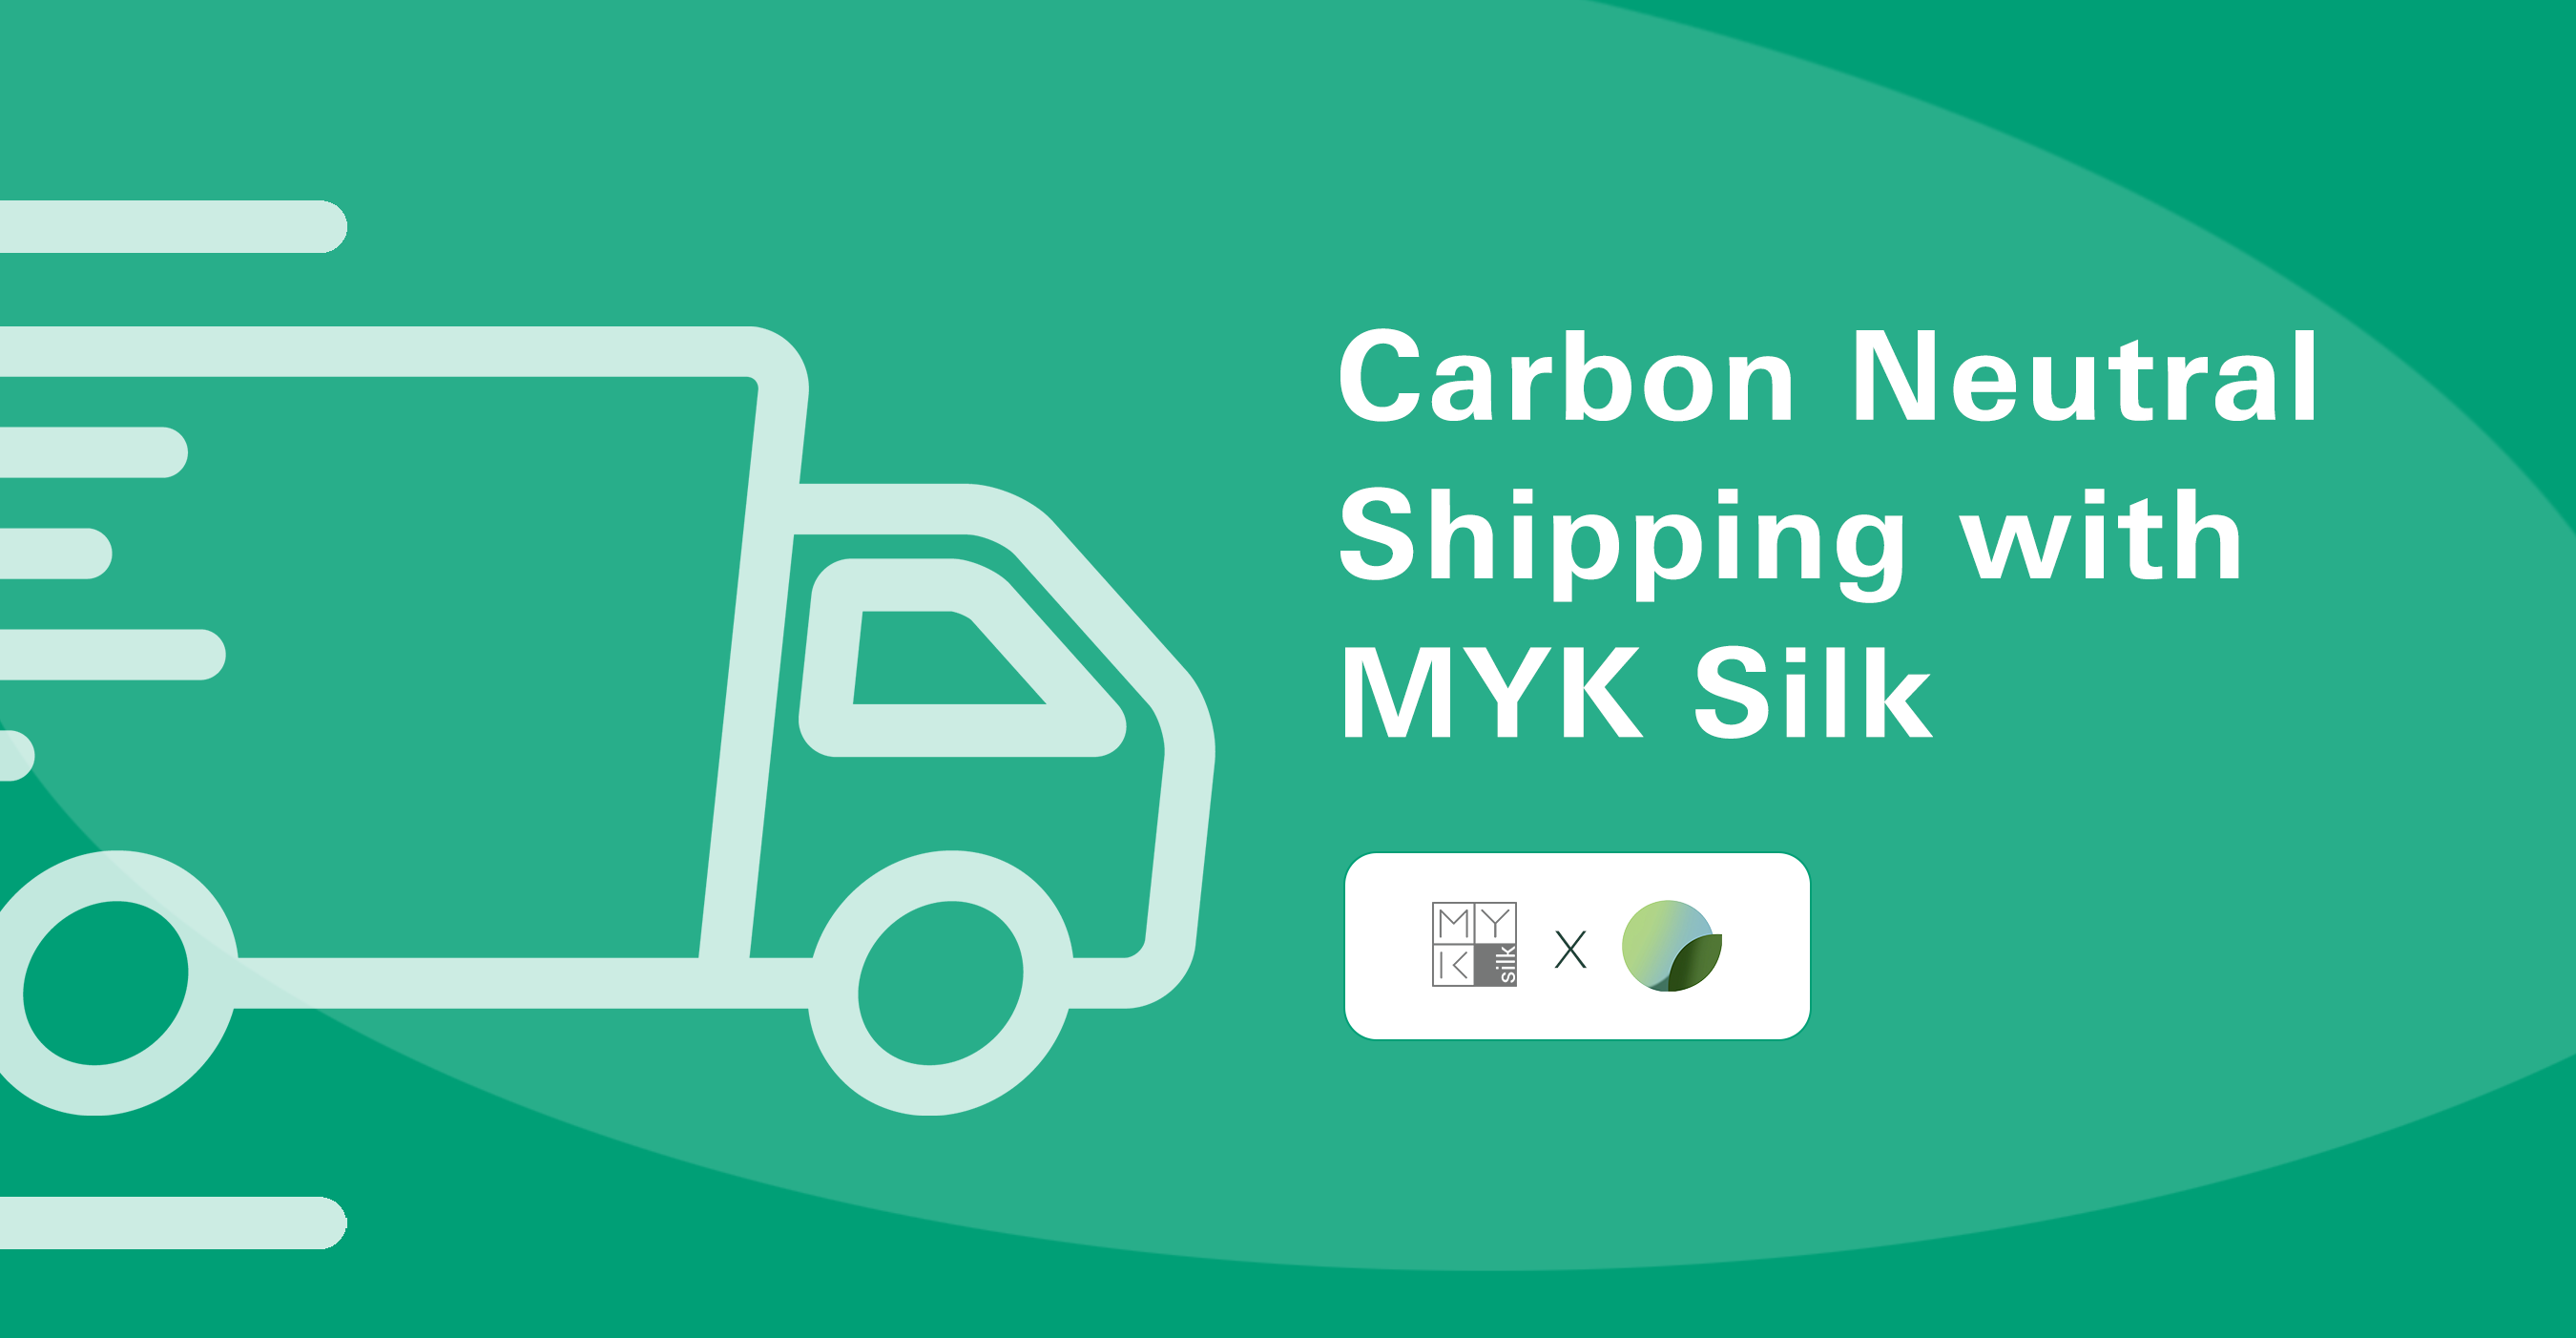 MYK Silk Now Offers Carbon-Neutral Shipping!